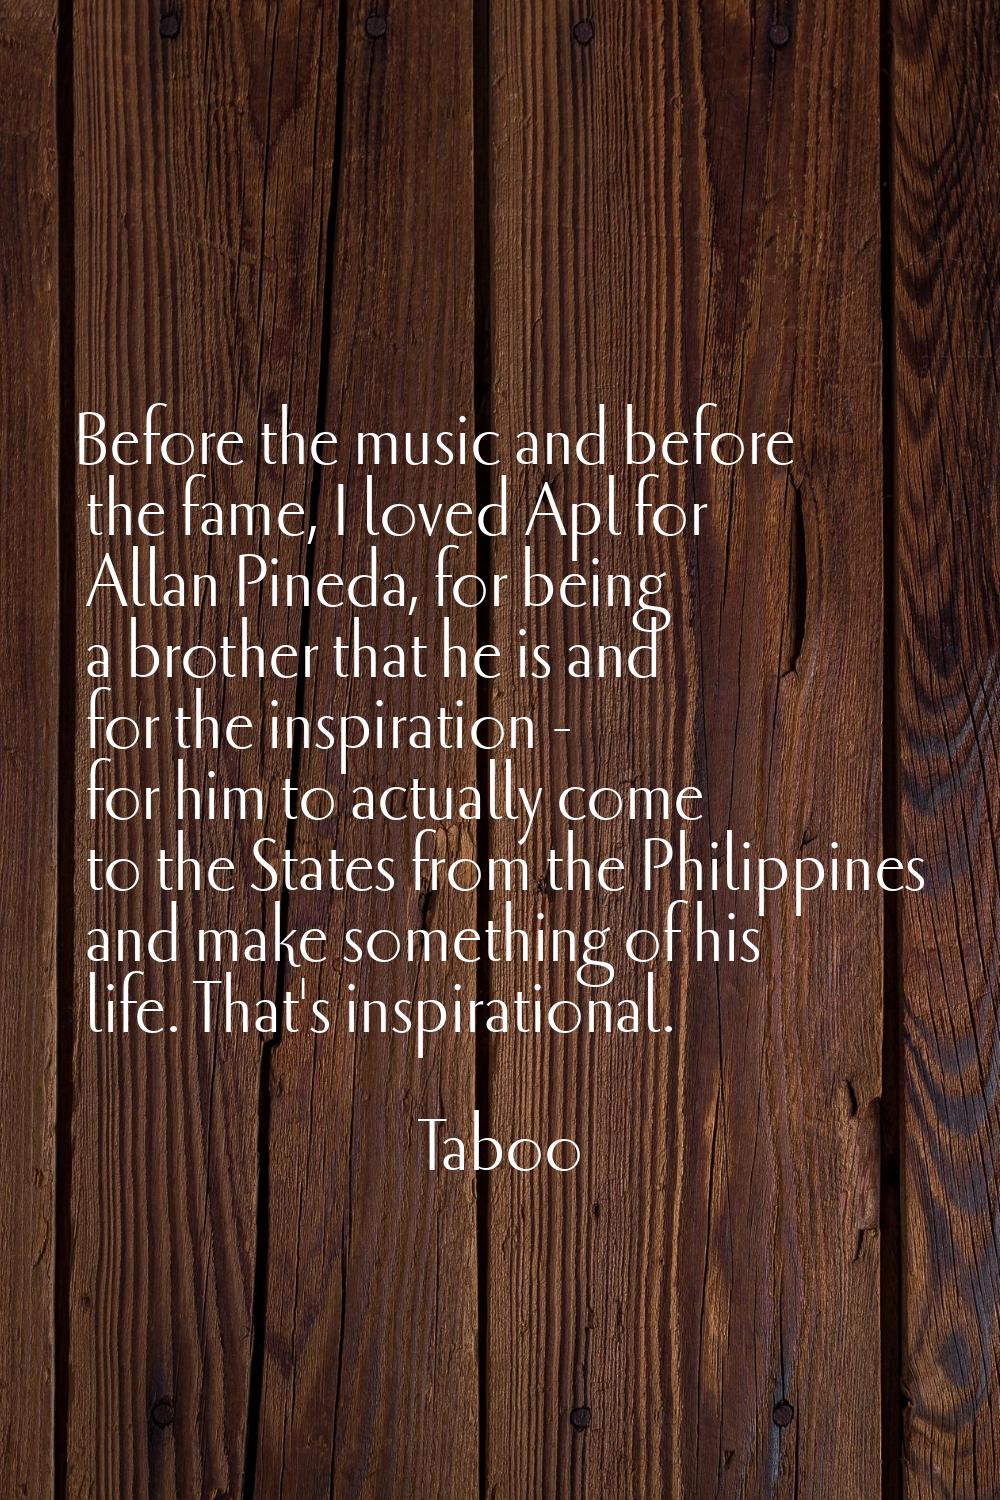 Before the music and before the fame, I loved Apl for Allan Pineda, for being a brother that he is 